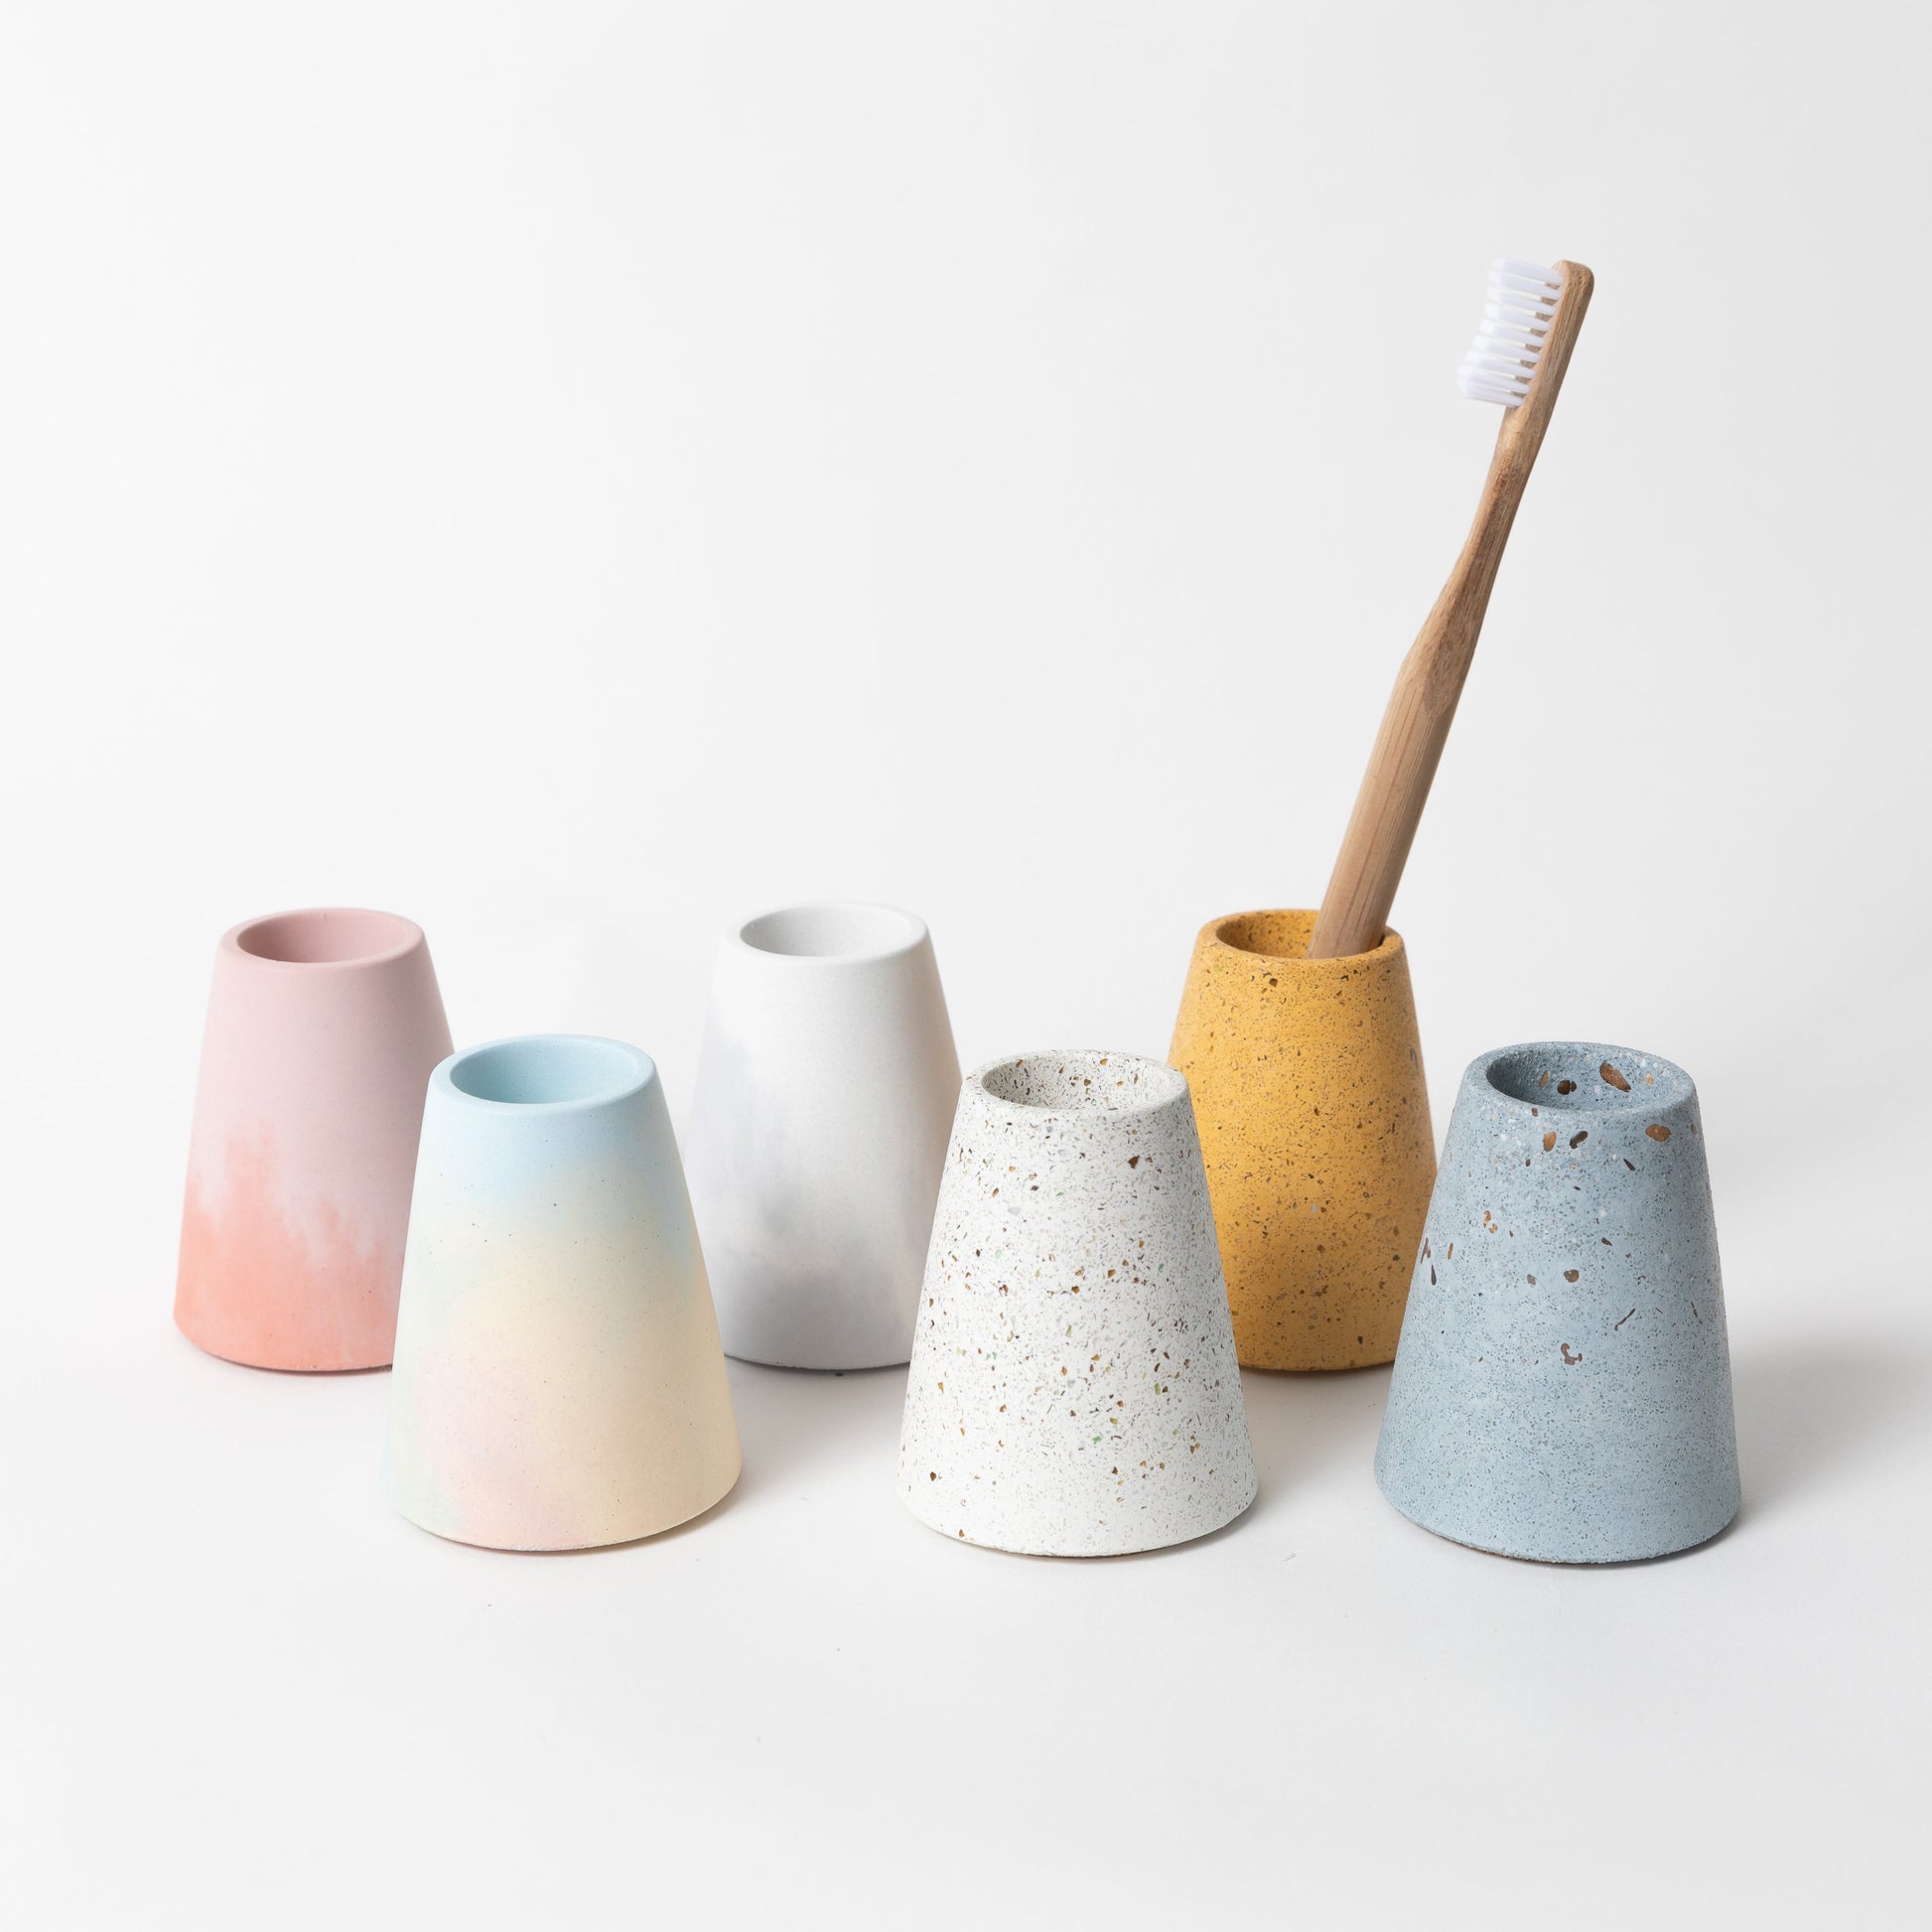 Concrete terrazzo toothbrush holder seen in various colors.